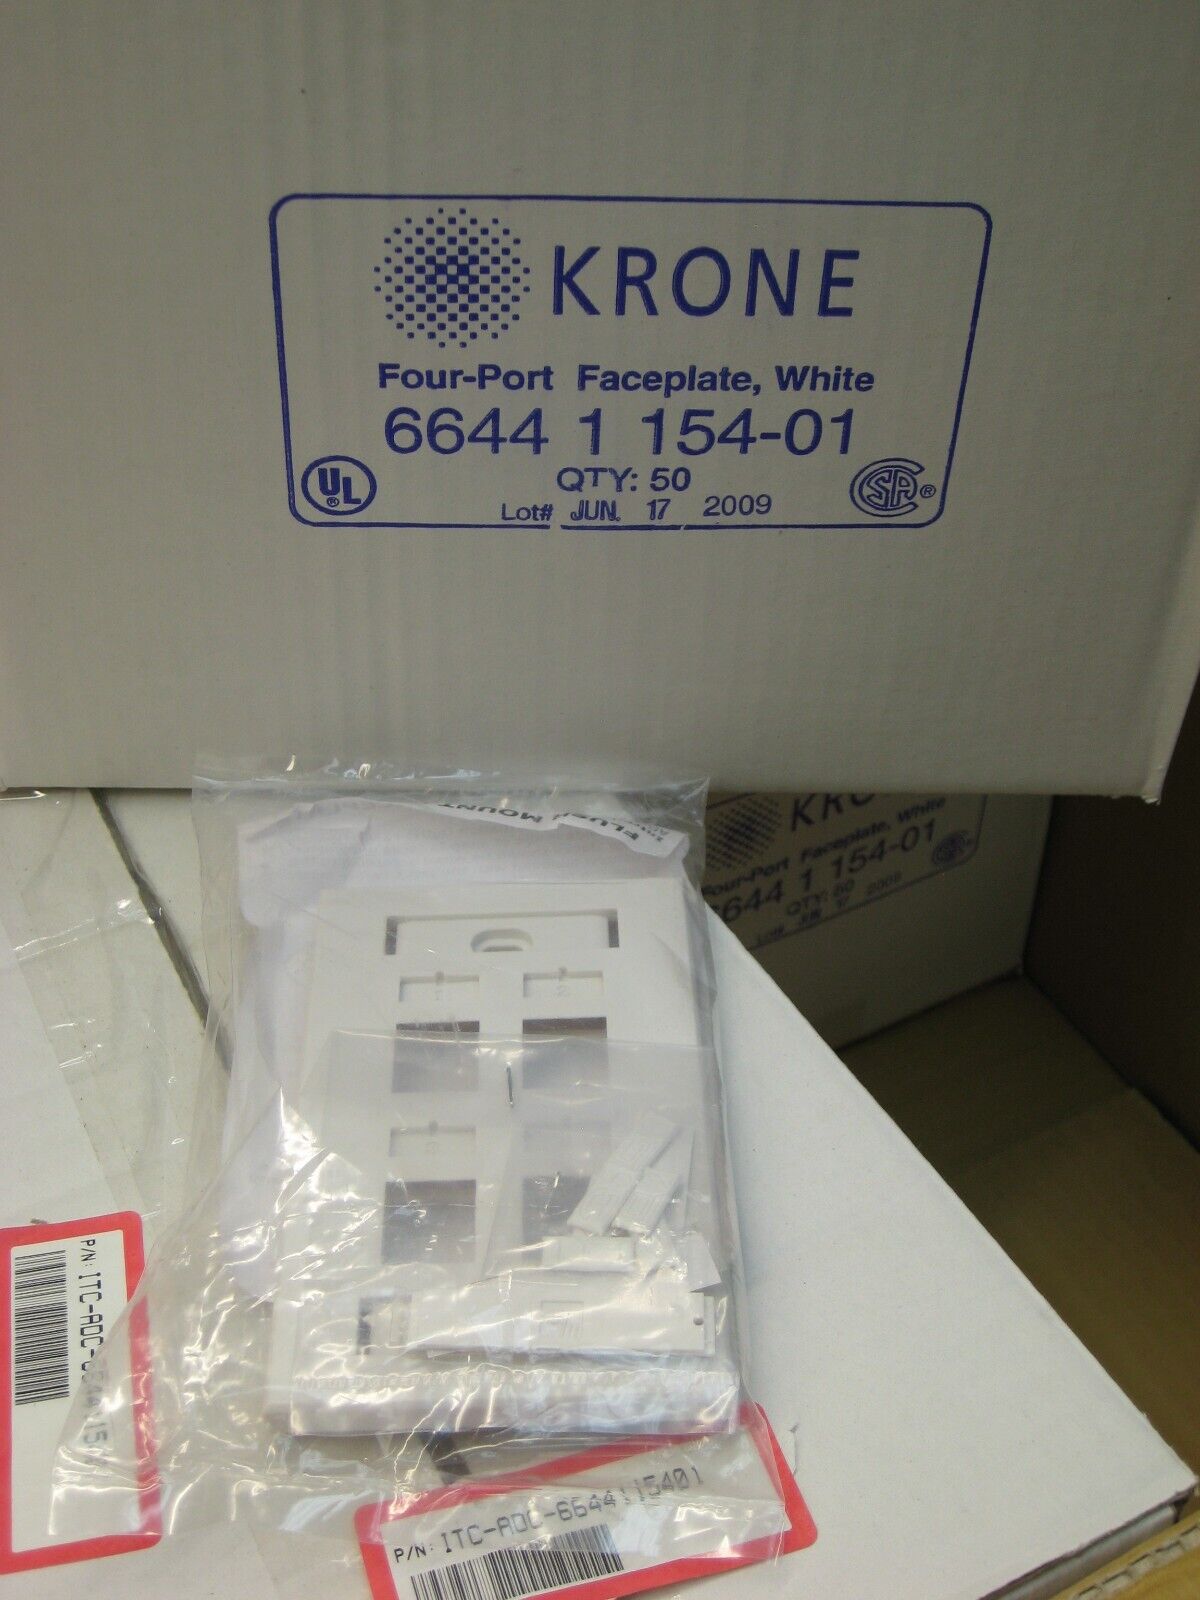 200 Krone 4-Port Faceplate White ITC-ADC-6644115401 New